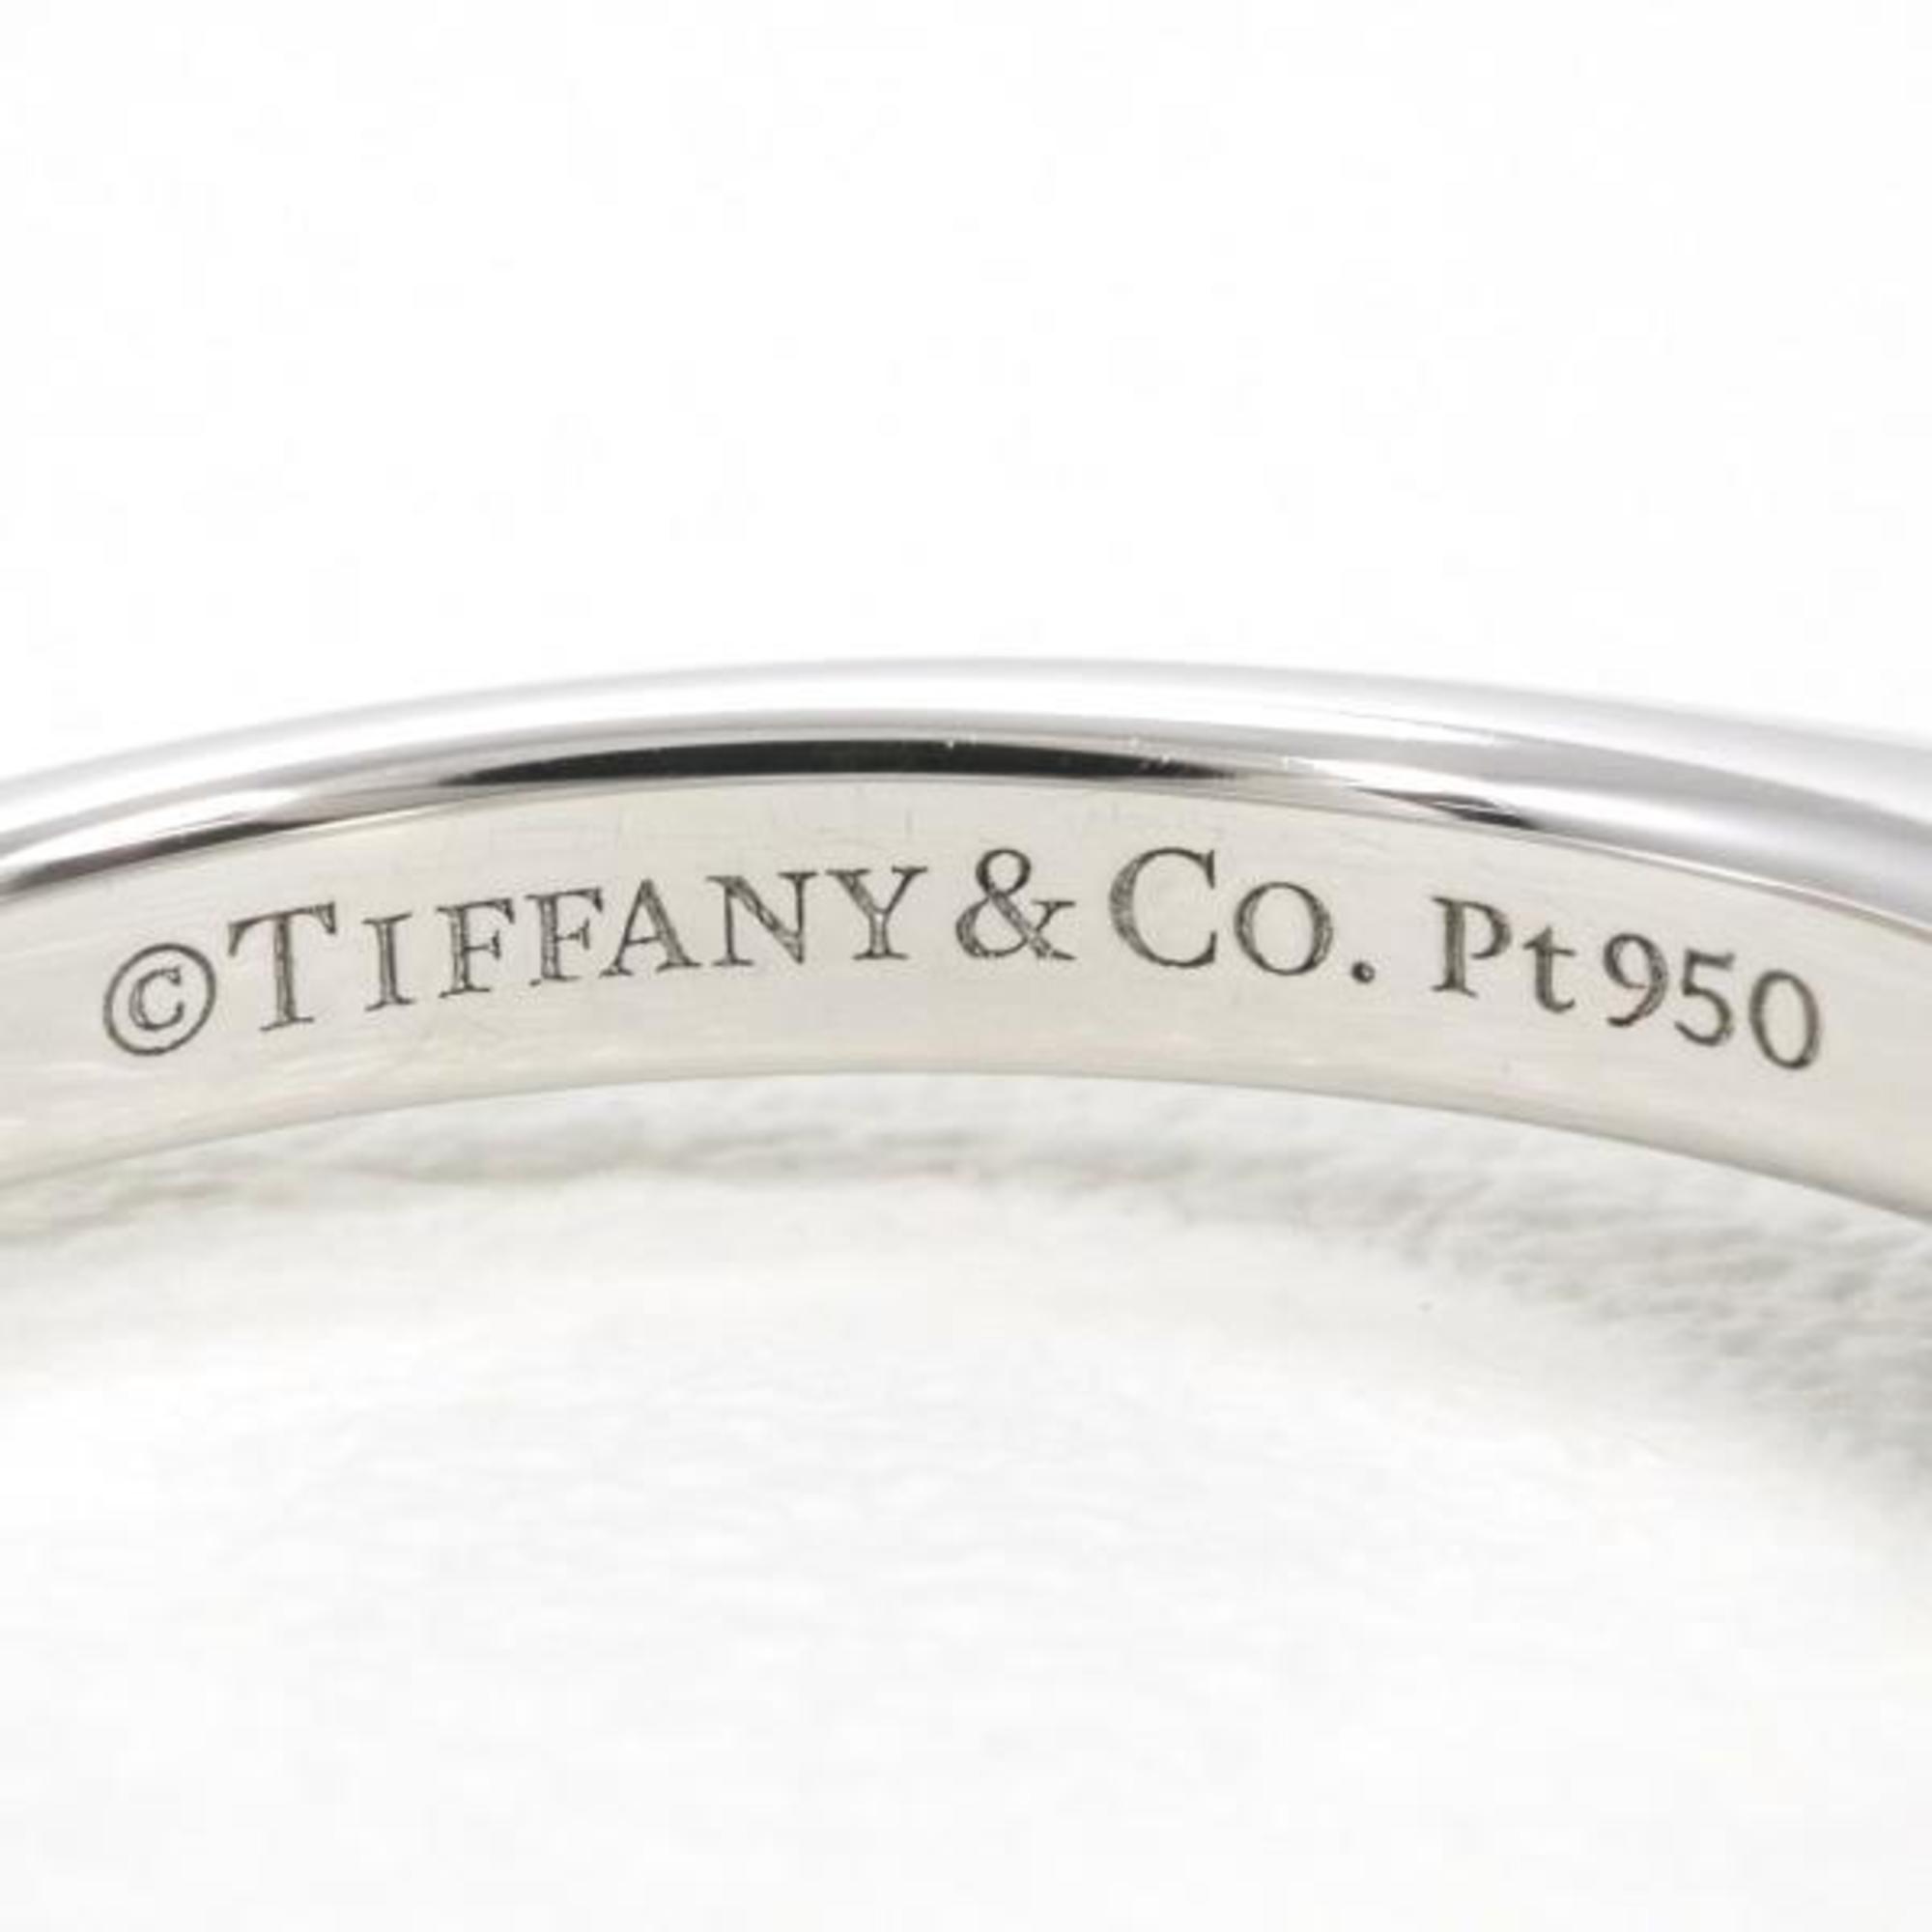 Tiffany Solitaire PT950 Ring Diamond 0.27 VS1 Certificate of Authenticity Total Weight Approx. 3.6g Jewelry